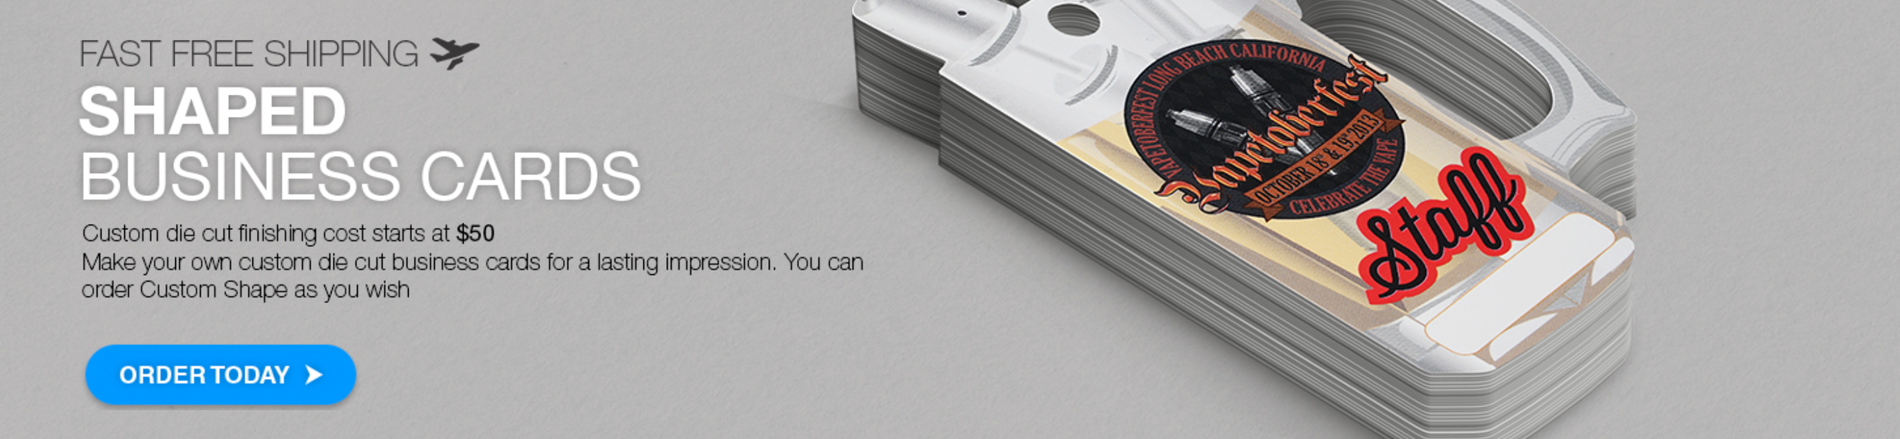 Shaped Business Cards by Aladdin Print